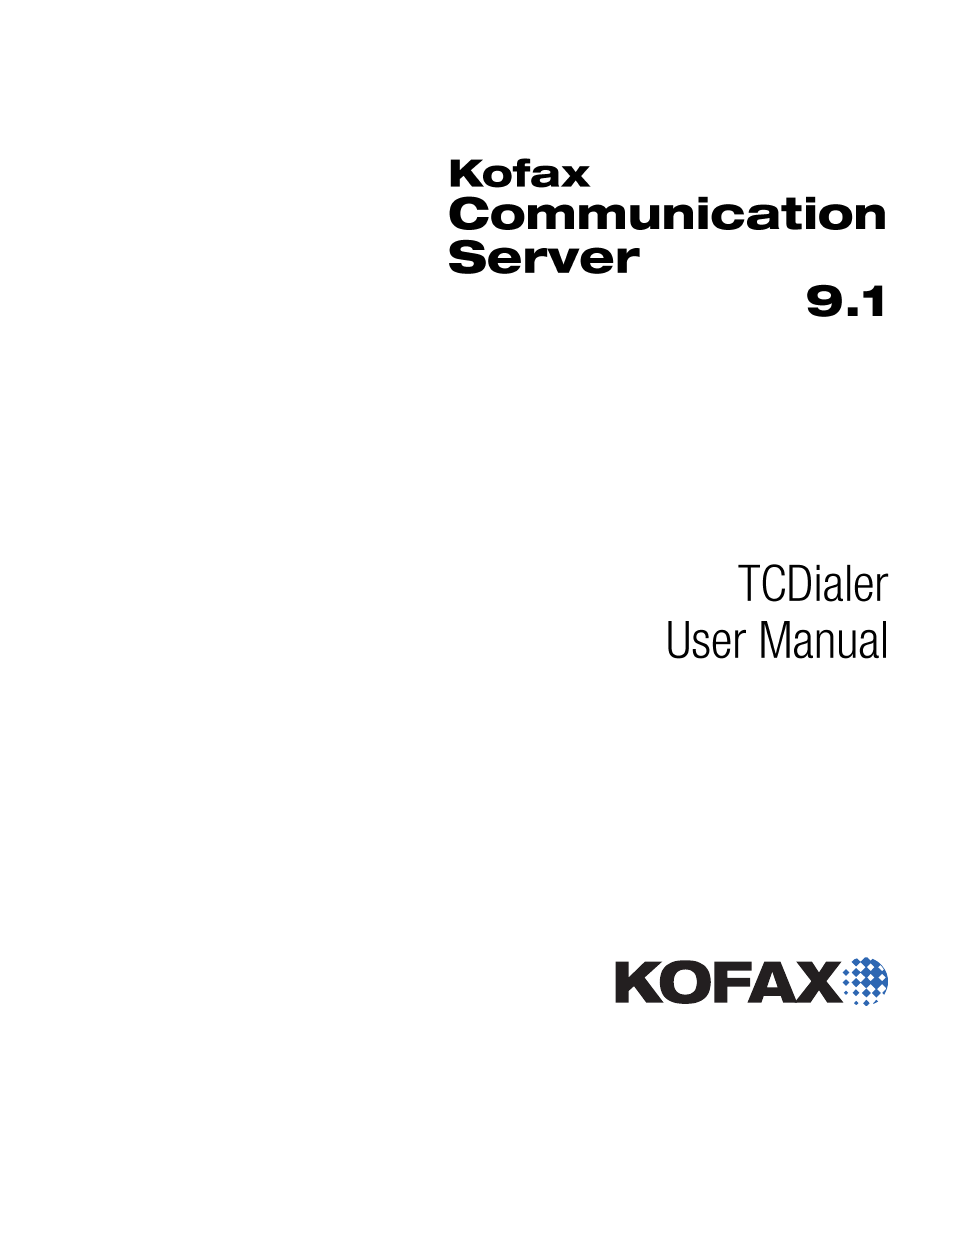 Kofax Communication Server 9.1 User Manual | 16 pages